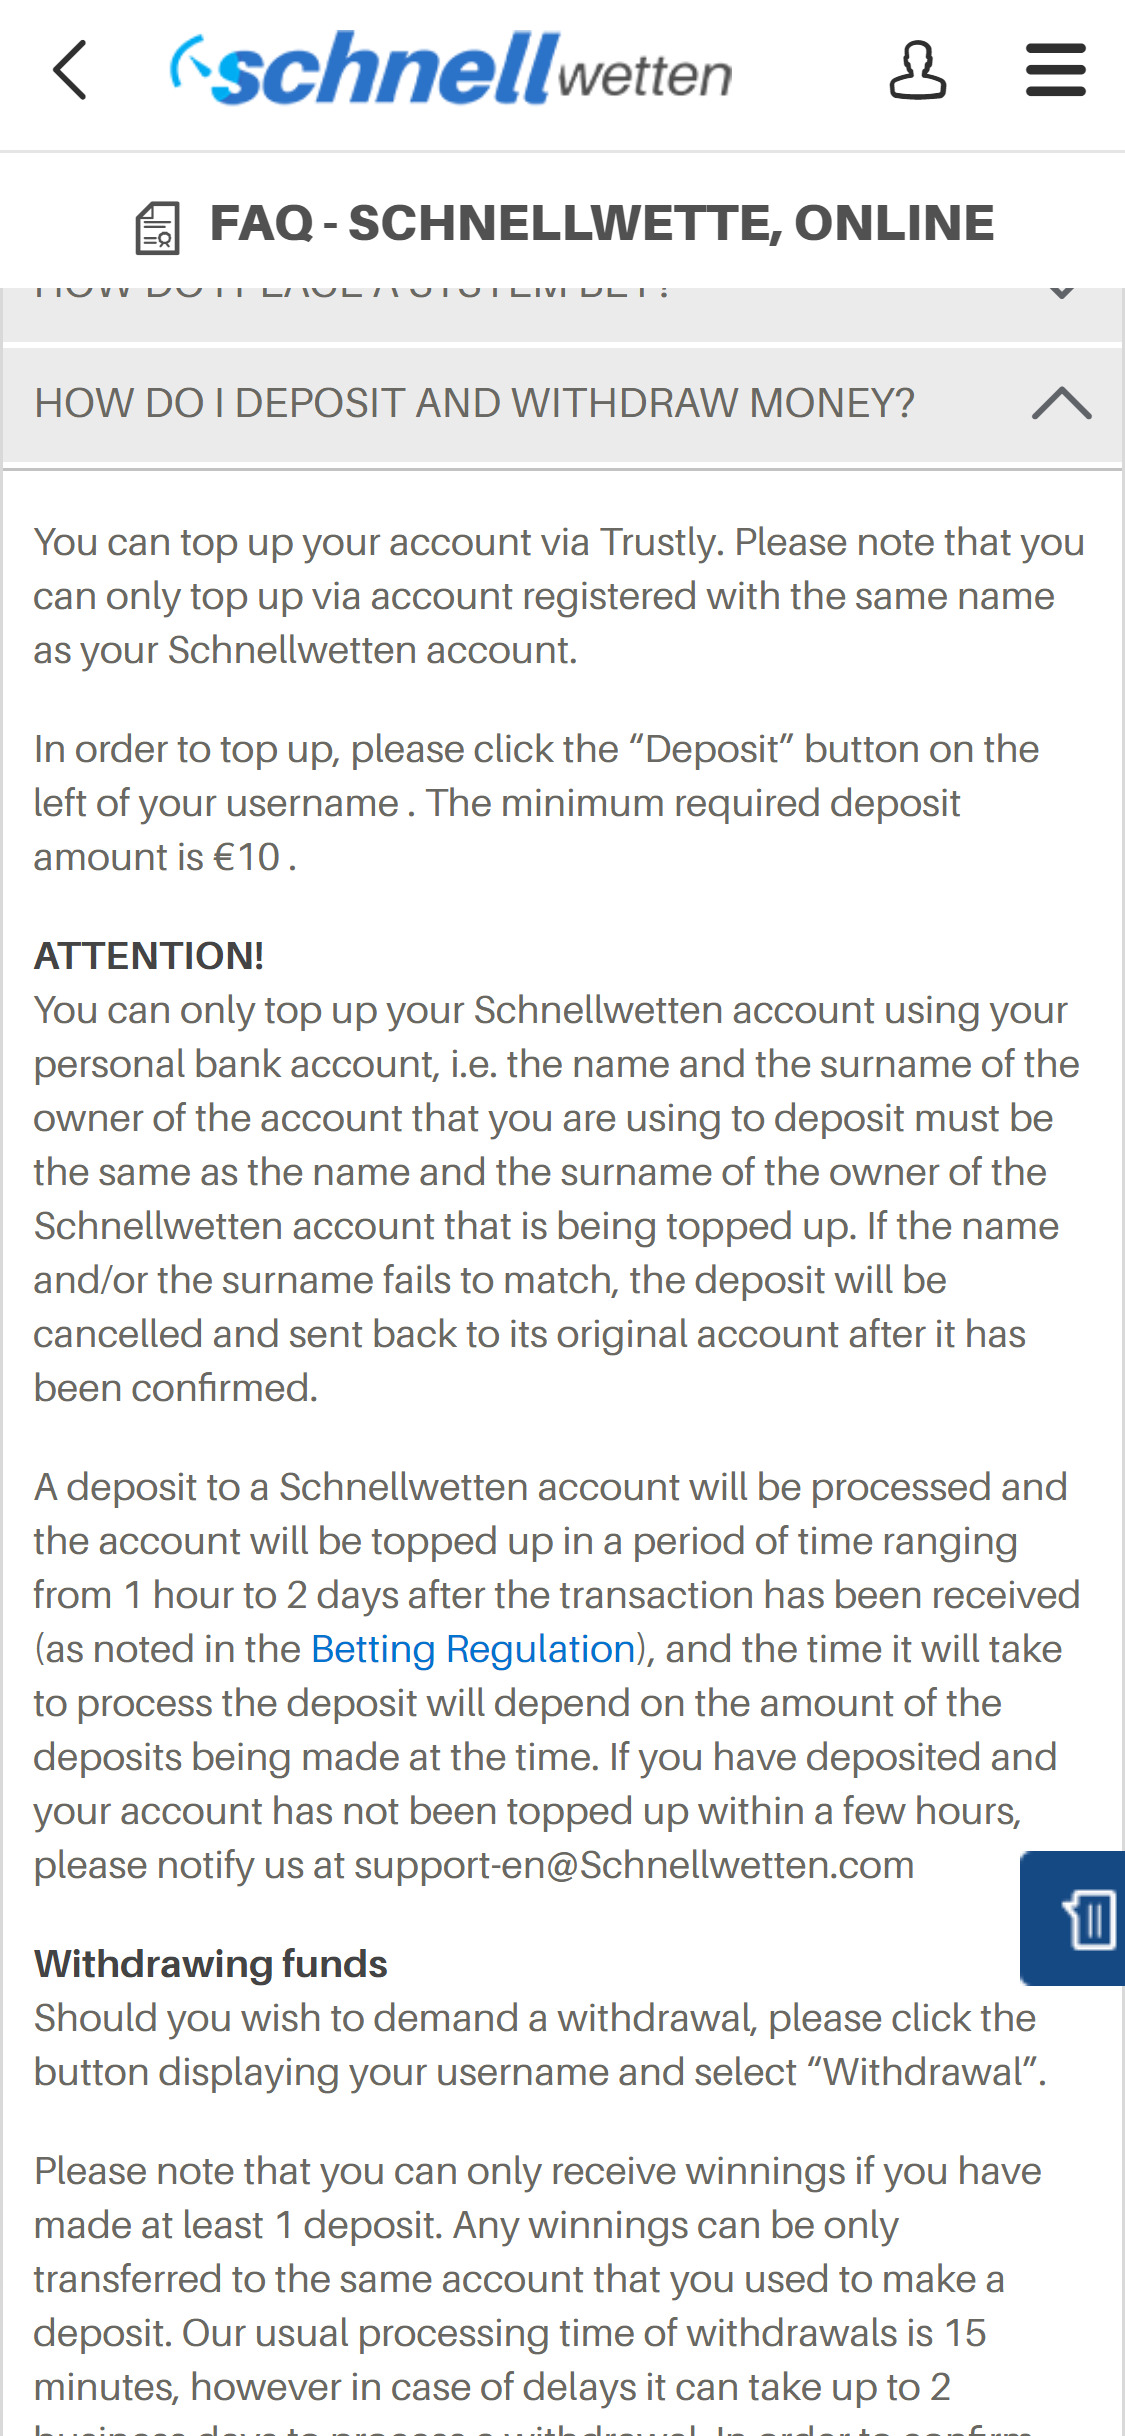 SchnellWetten Casino Mobile Payment Methods Review